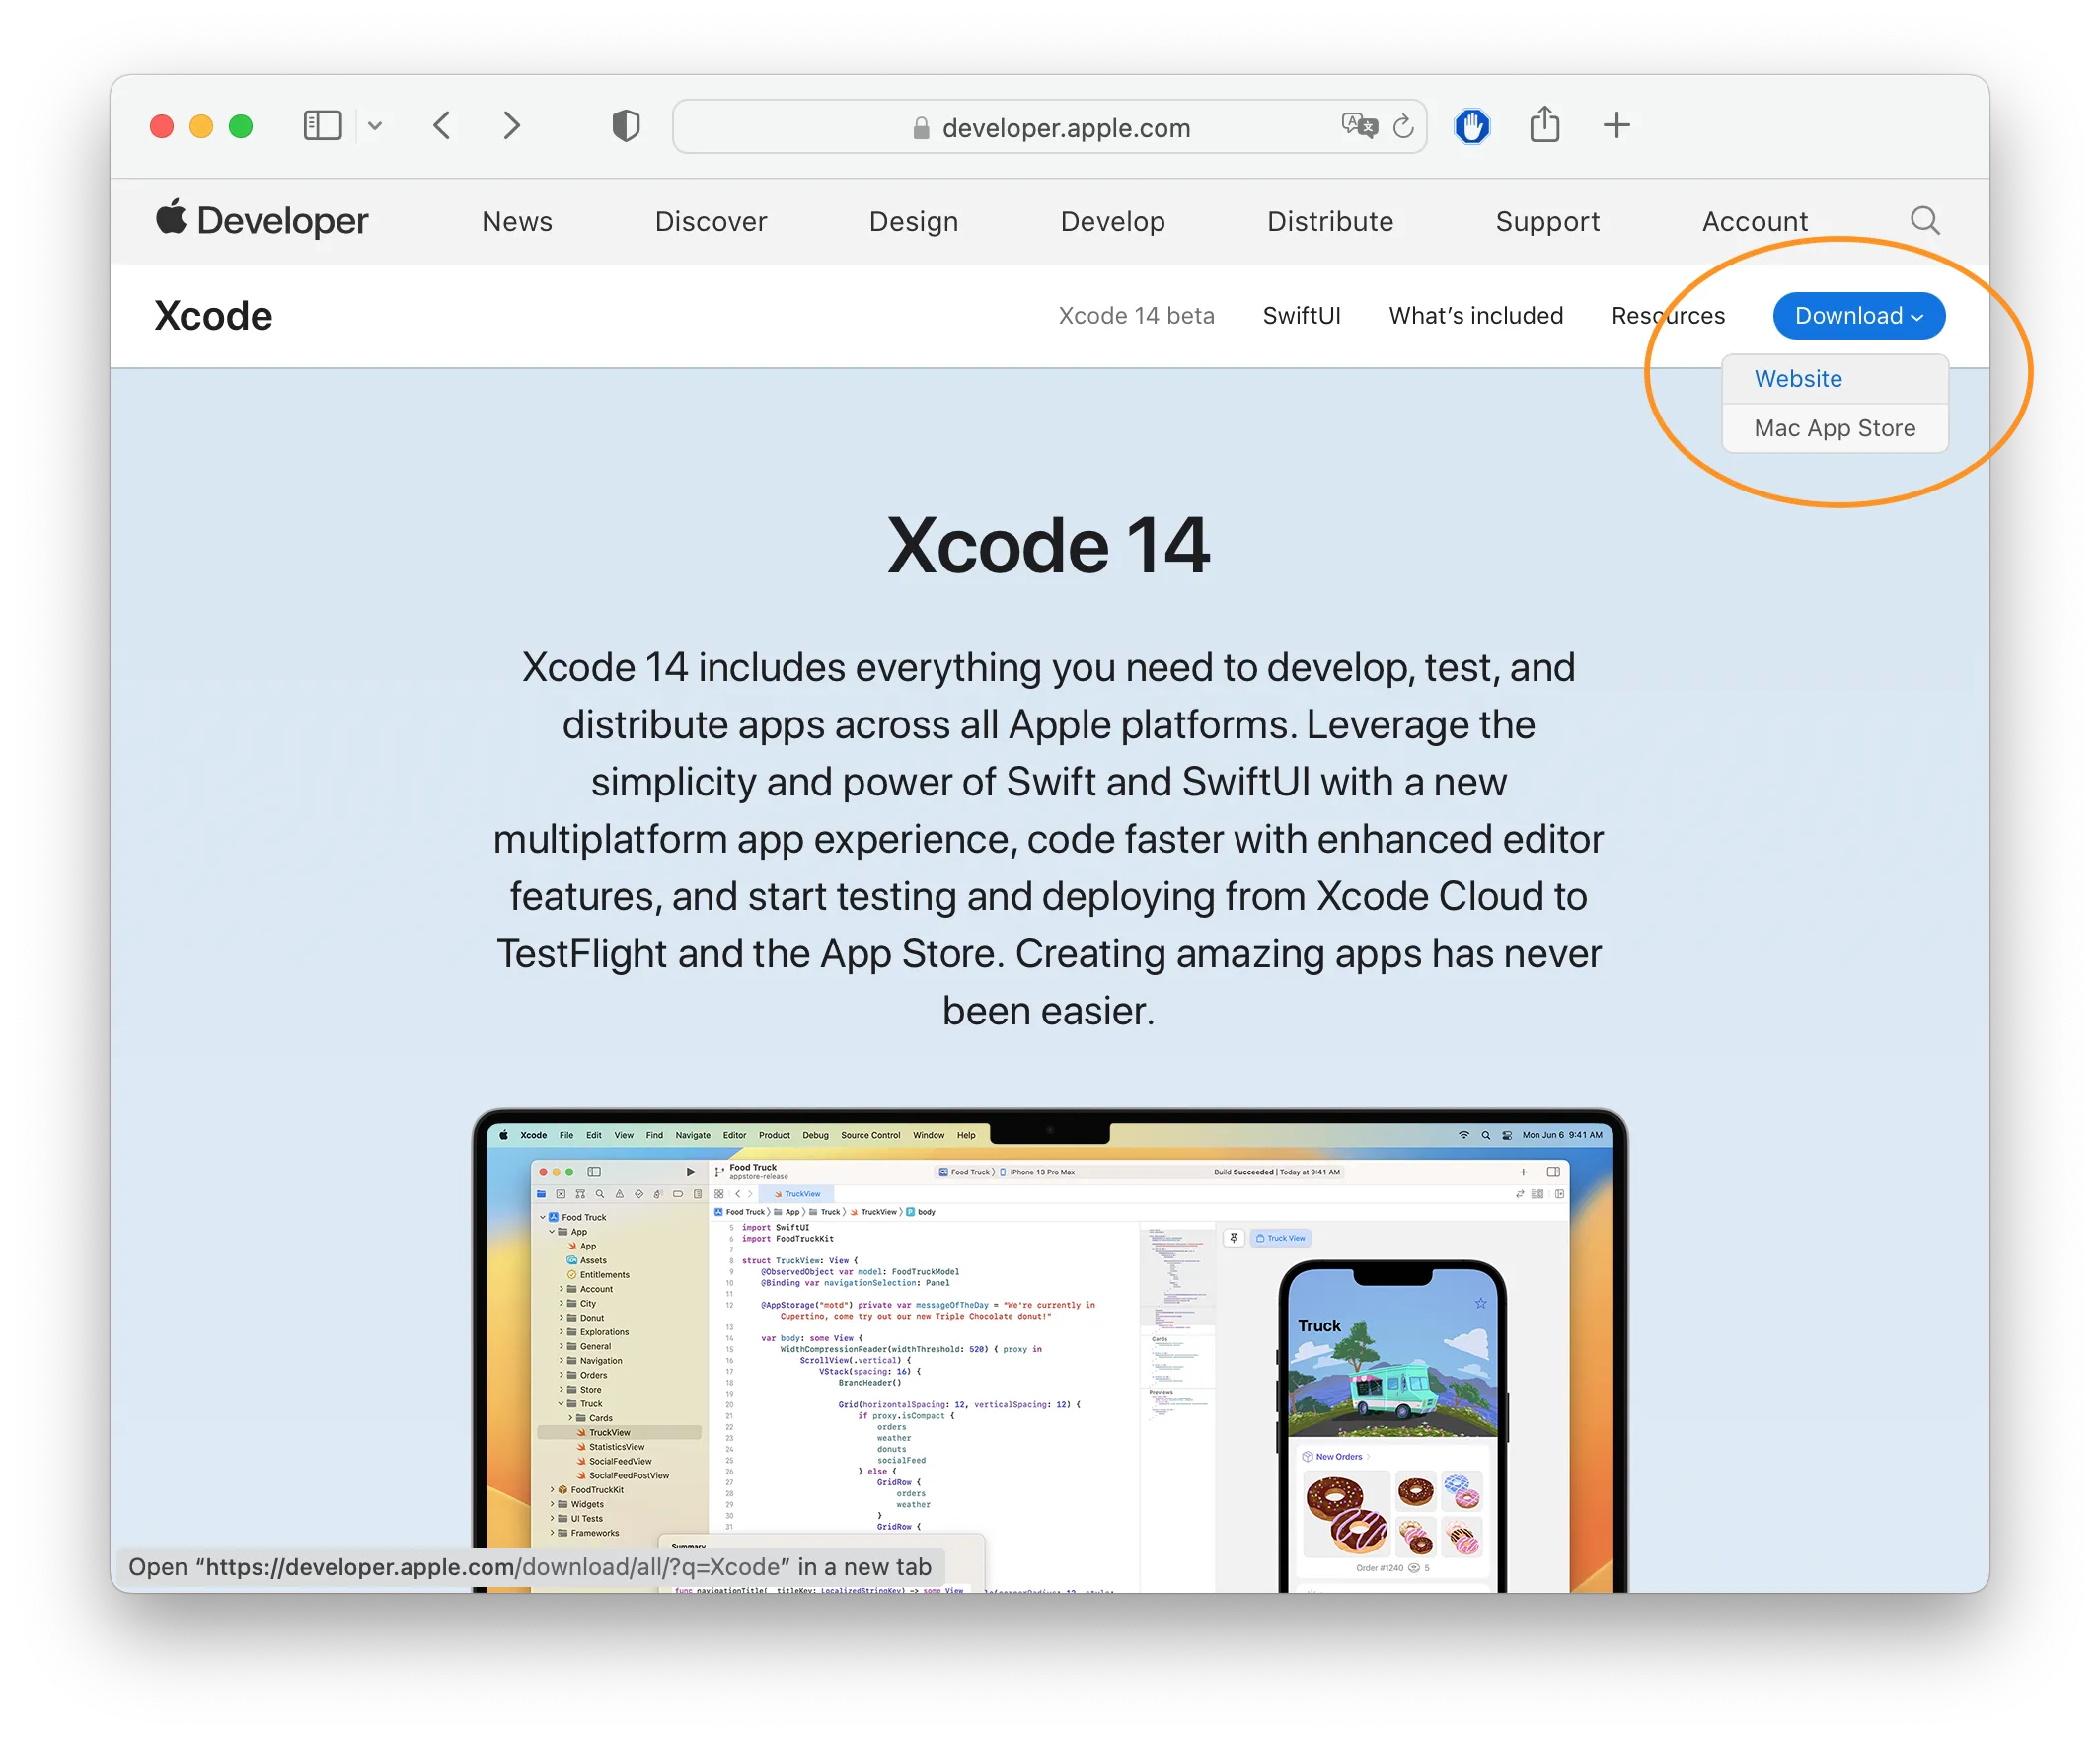 The Xcode page on Apple’s website